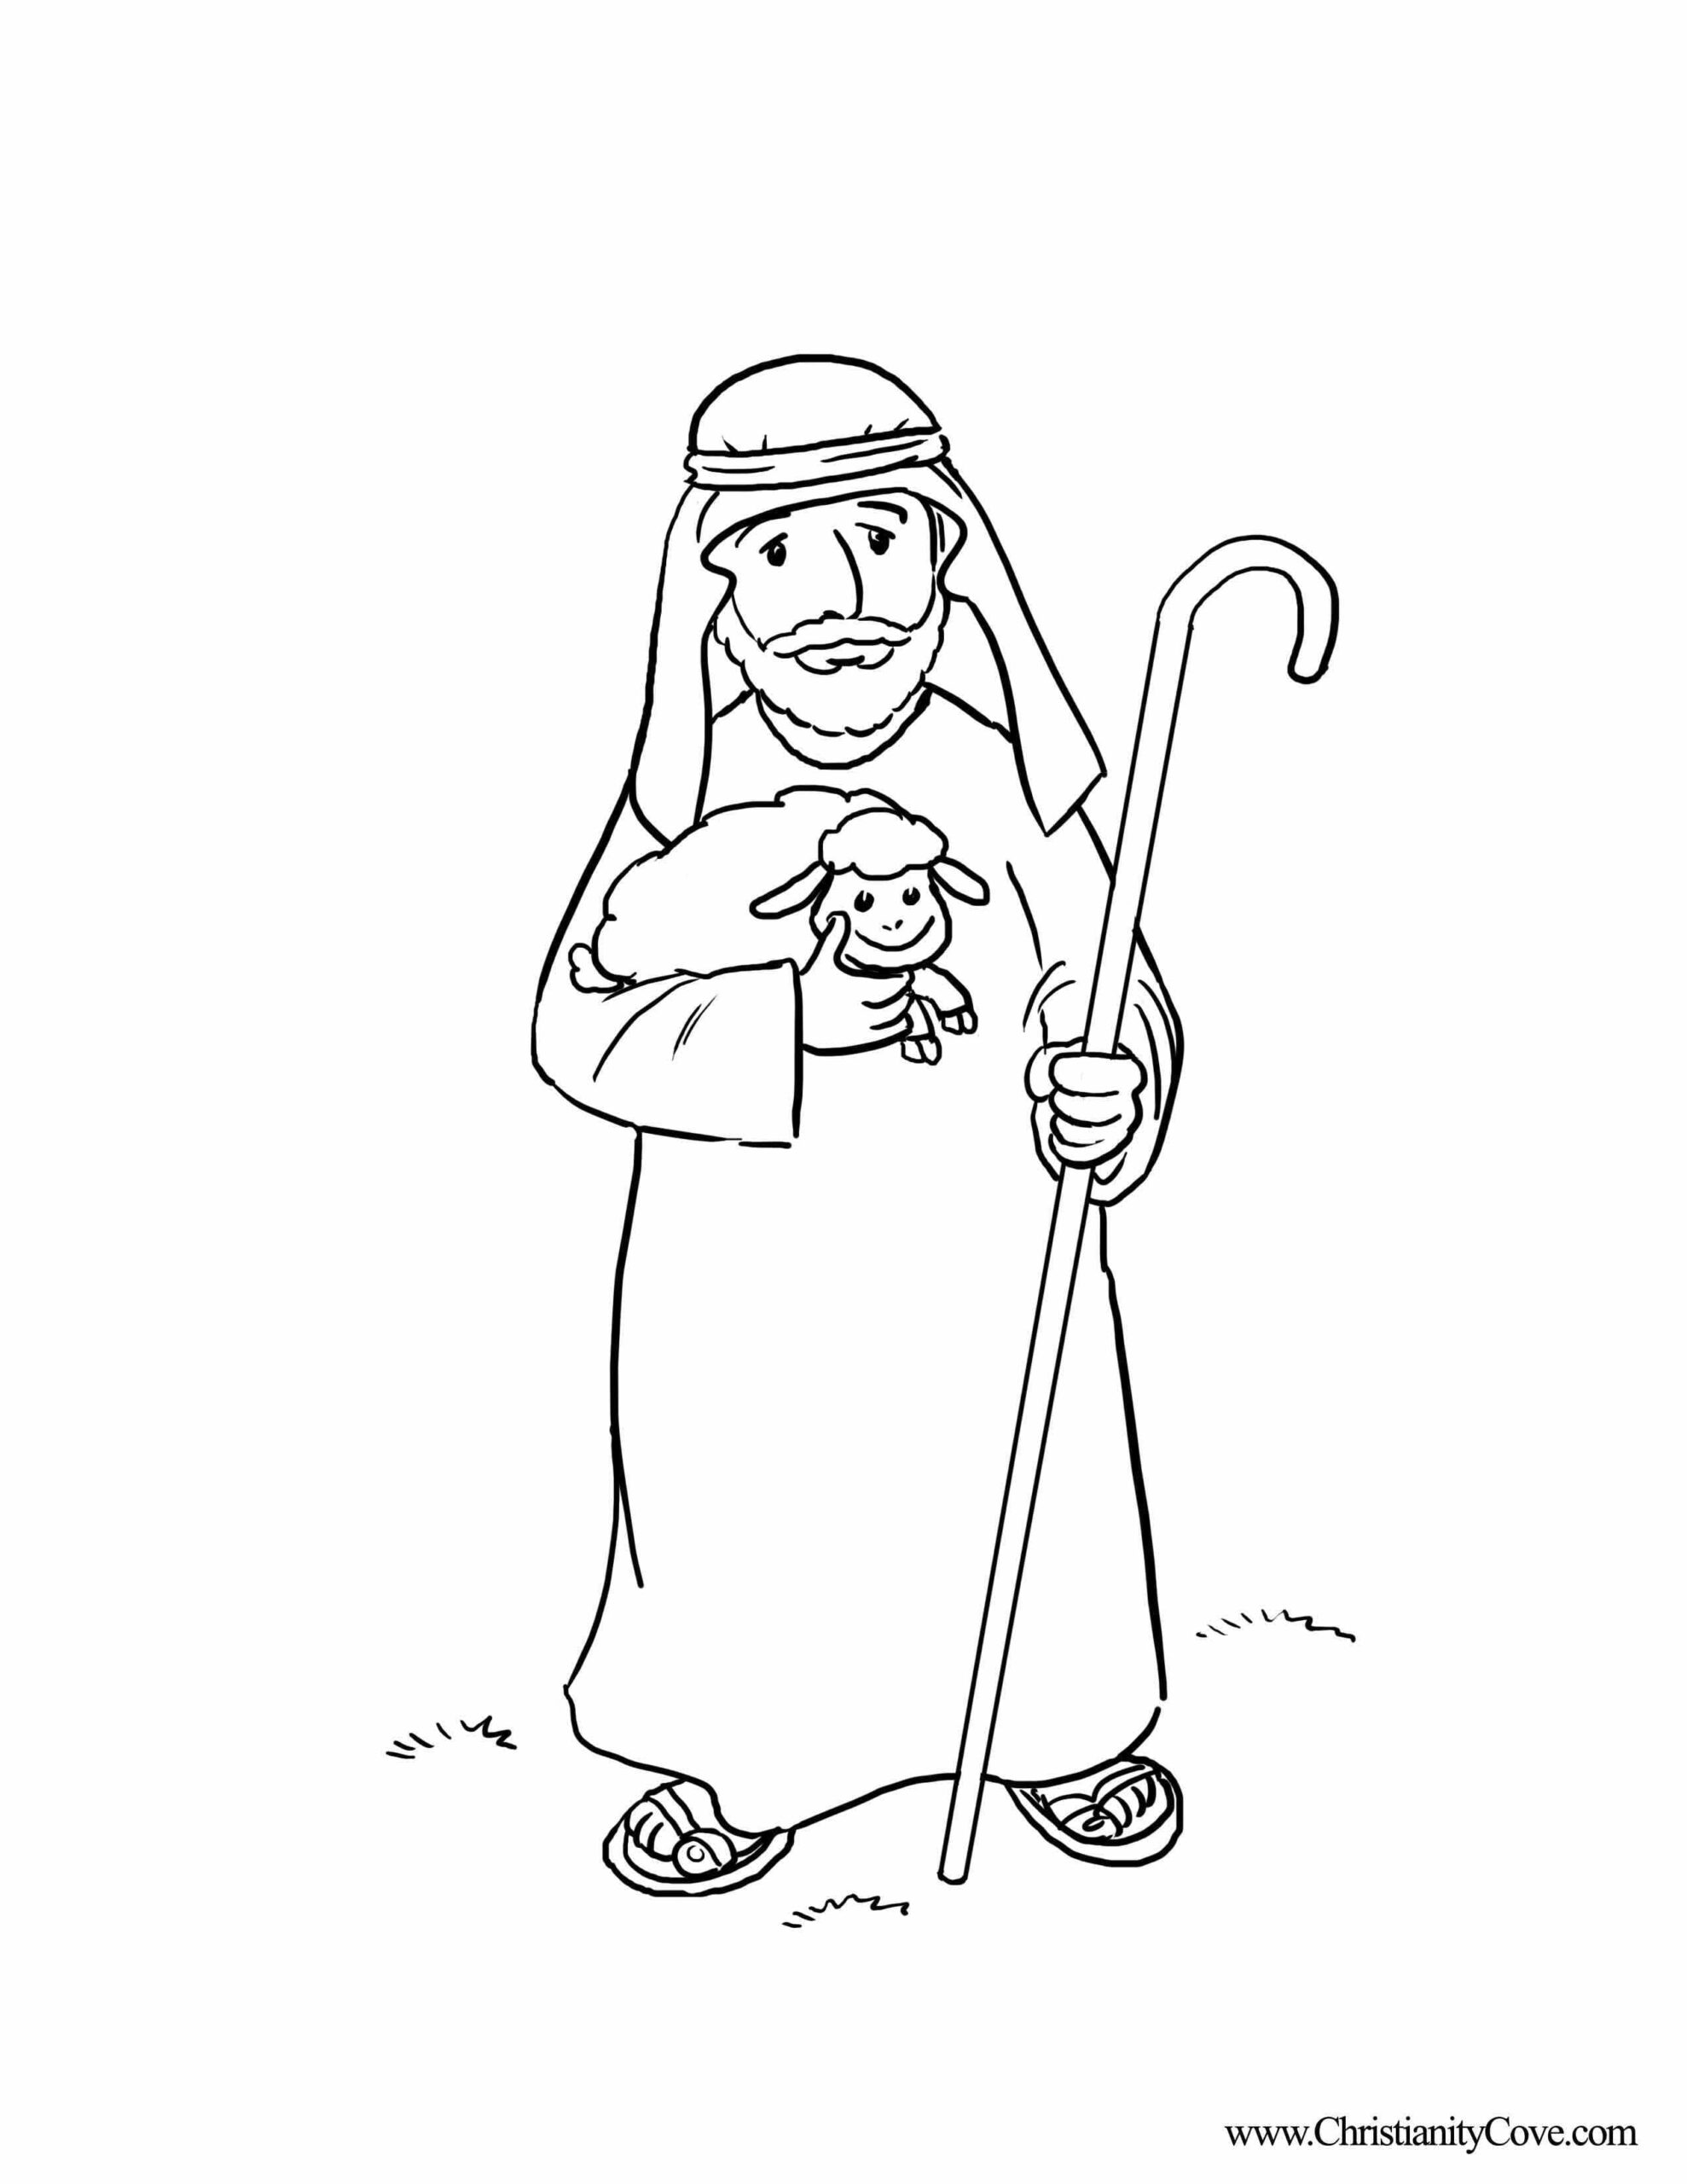 Bible Printables: Coloring Pages For Sunday School - Christianity Cove pertaining to Free Printable Bible Characters Coloring Pages